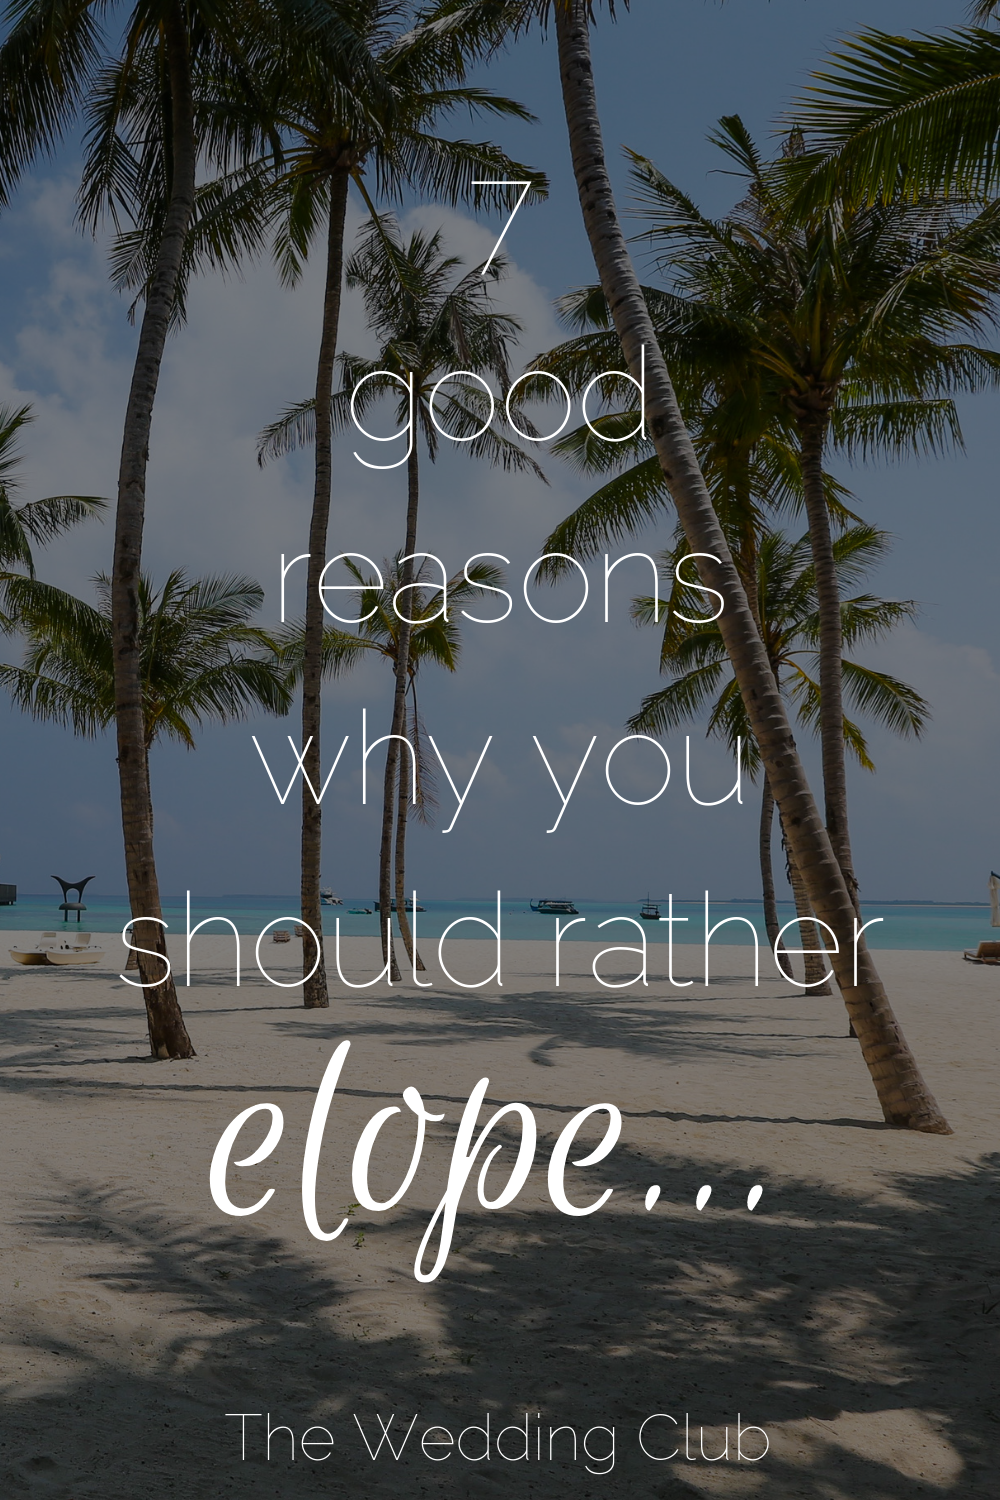 7 Good Reasons why you should rather Elope